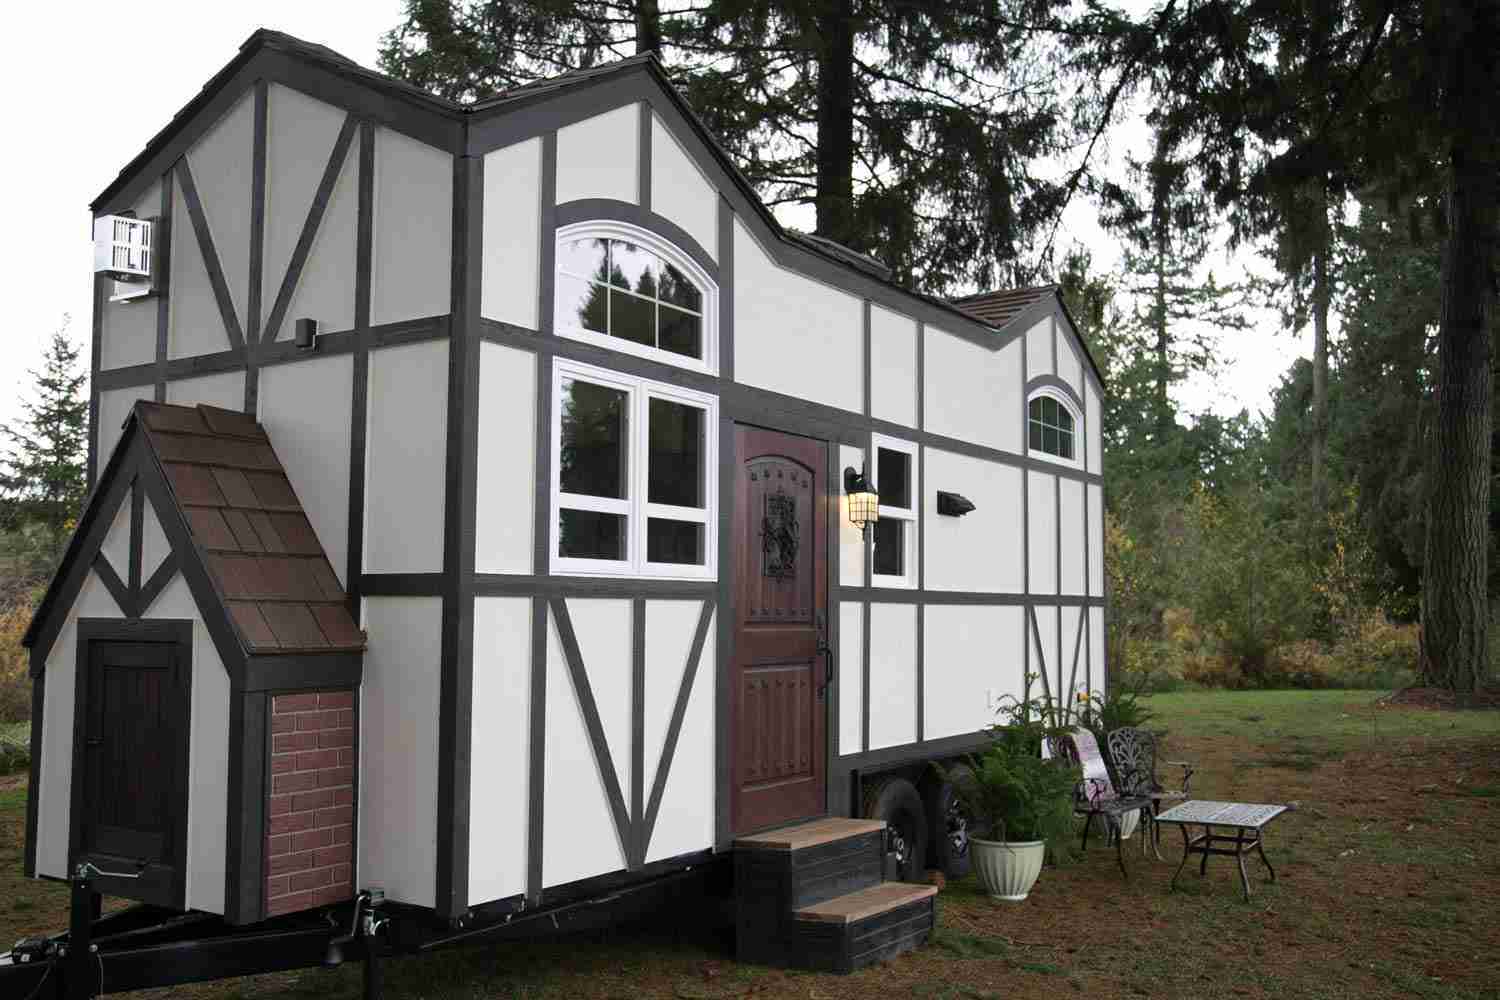 Unusual-tiny-homes-whimsical-exterior